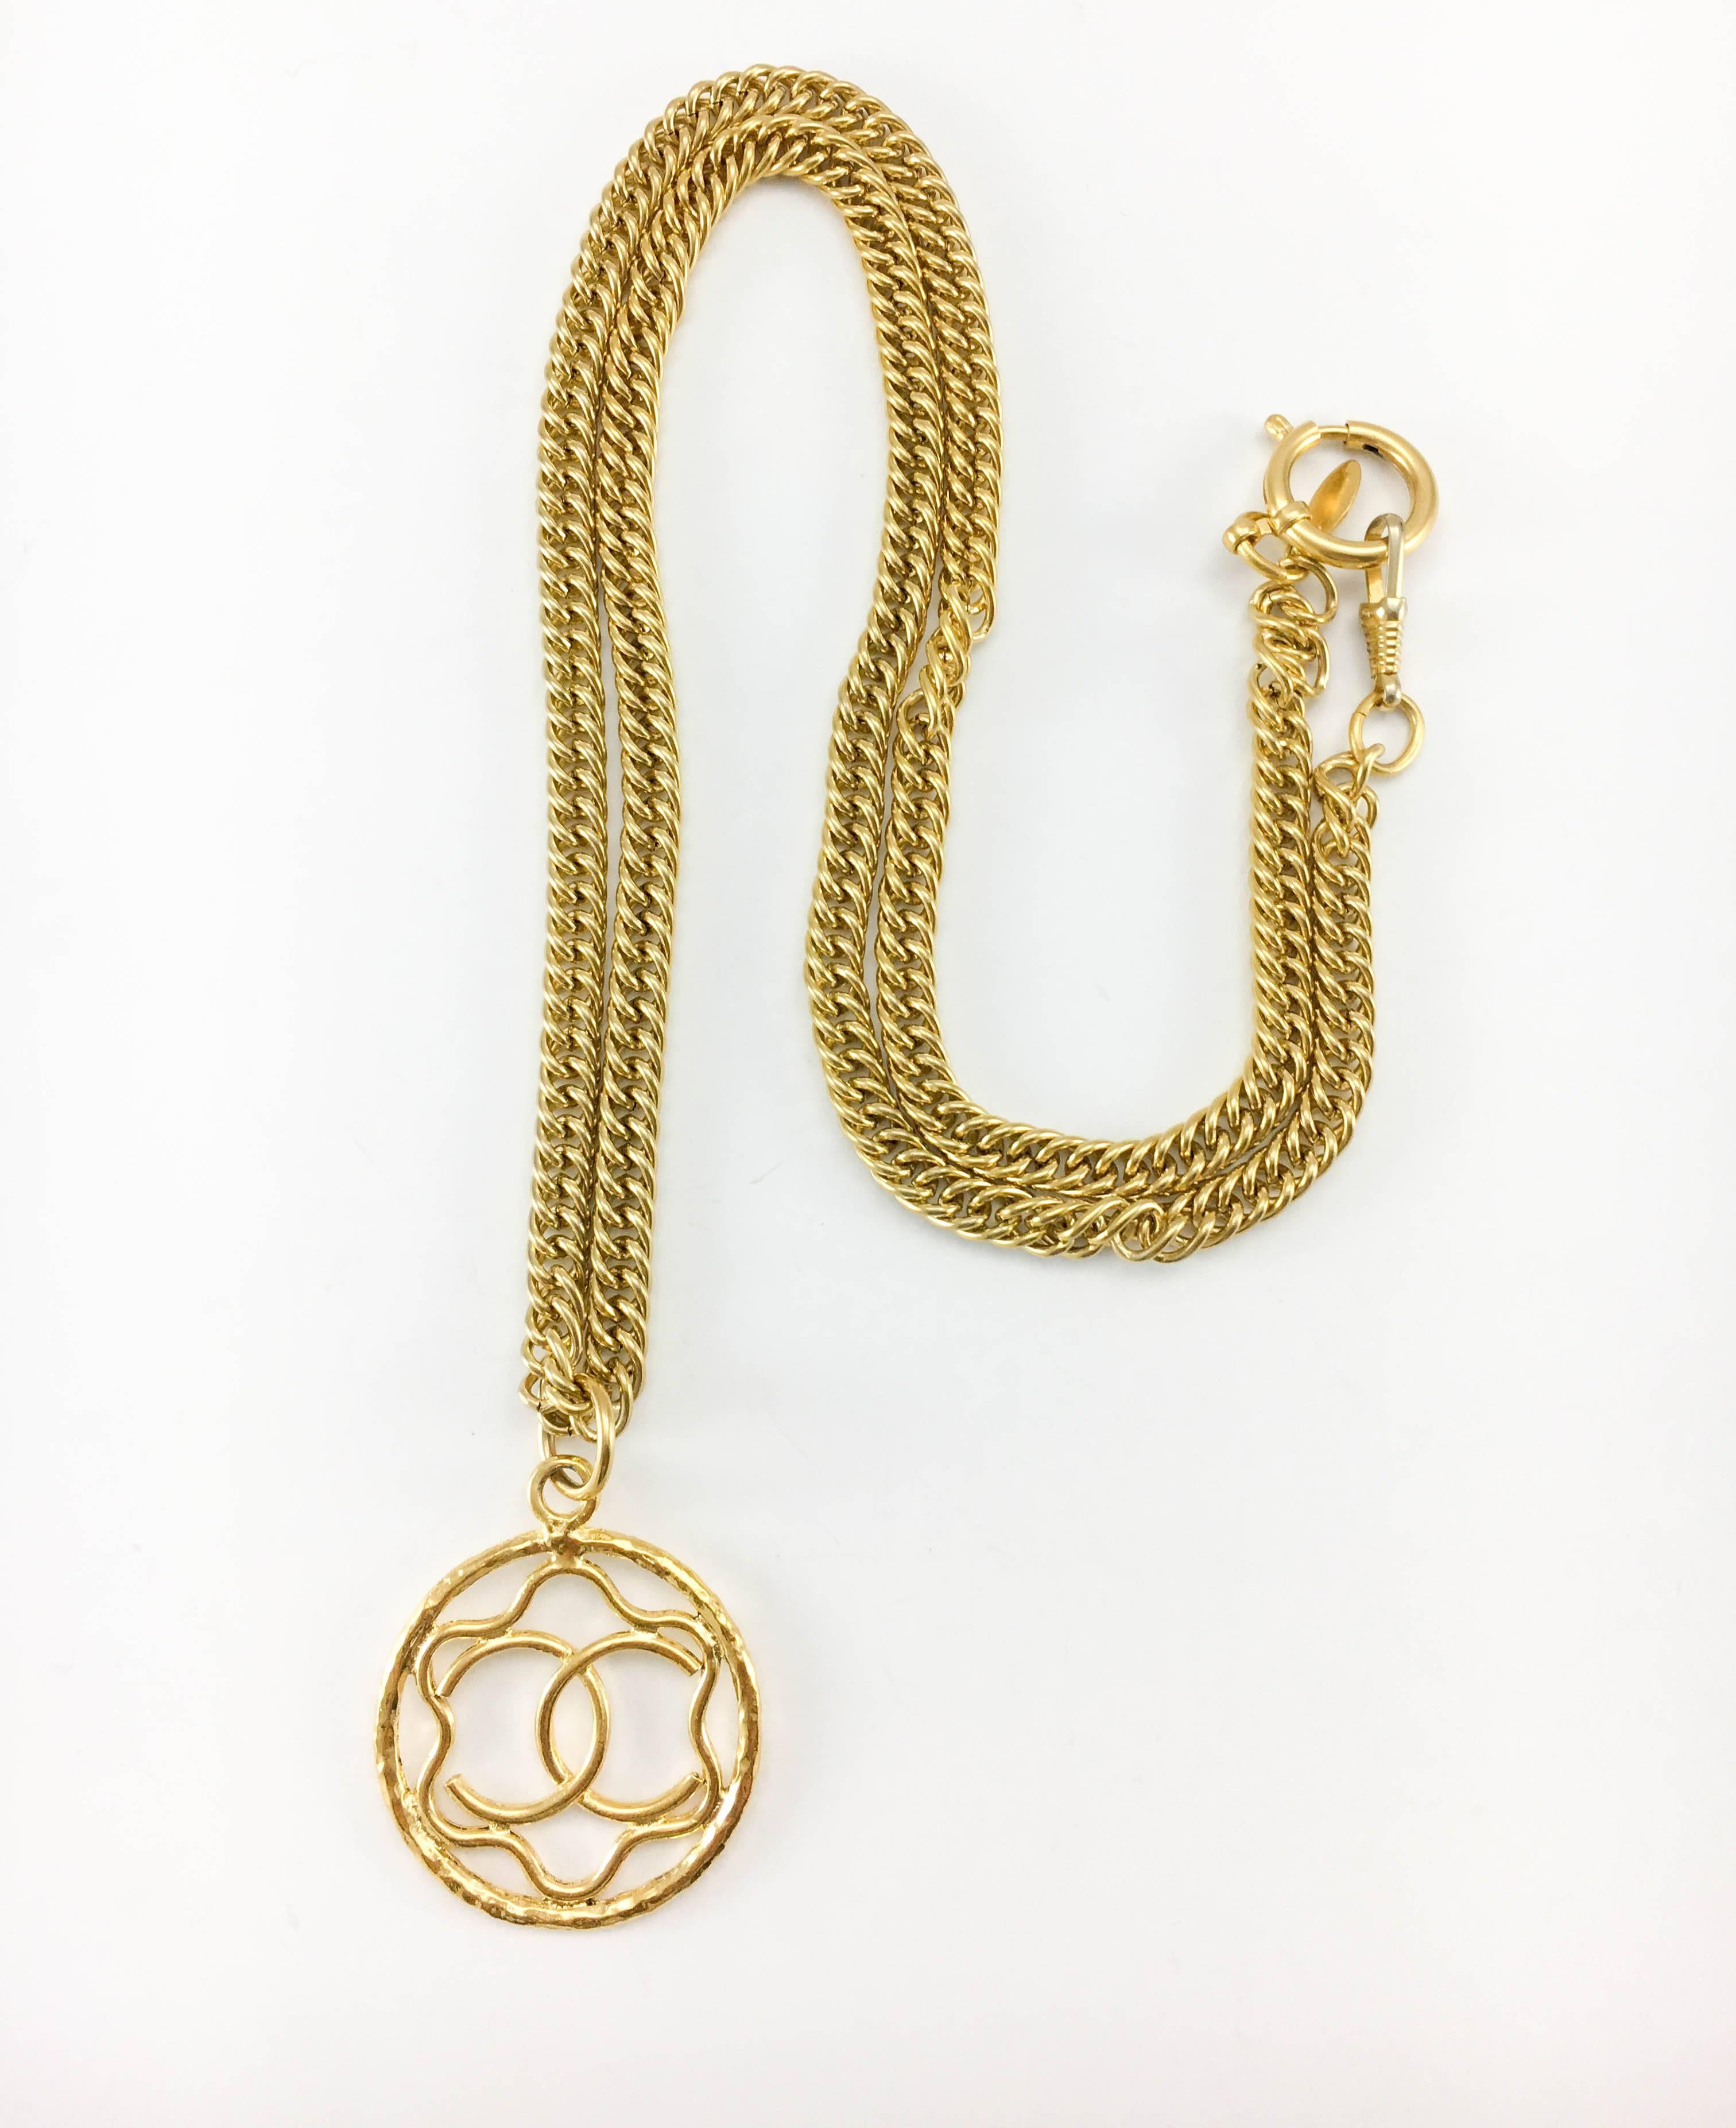 1980s Chanel Gilt Logo Medallion Pendant Long Chain Necklace In Excellent Condition For Sale In London, Chelsea